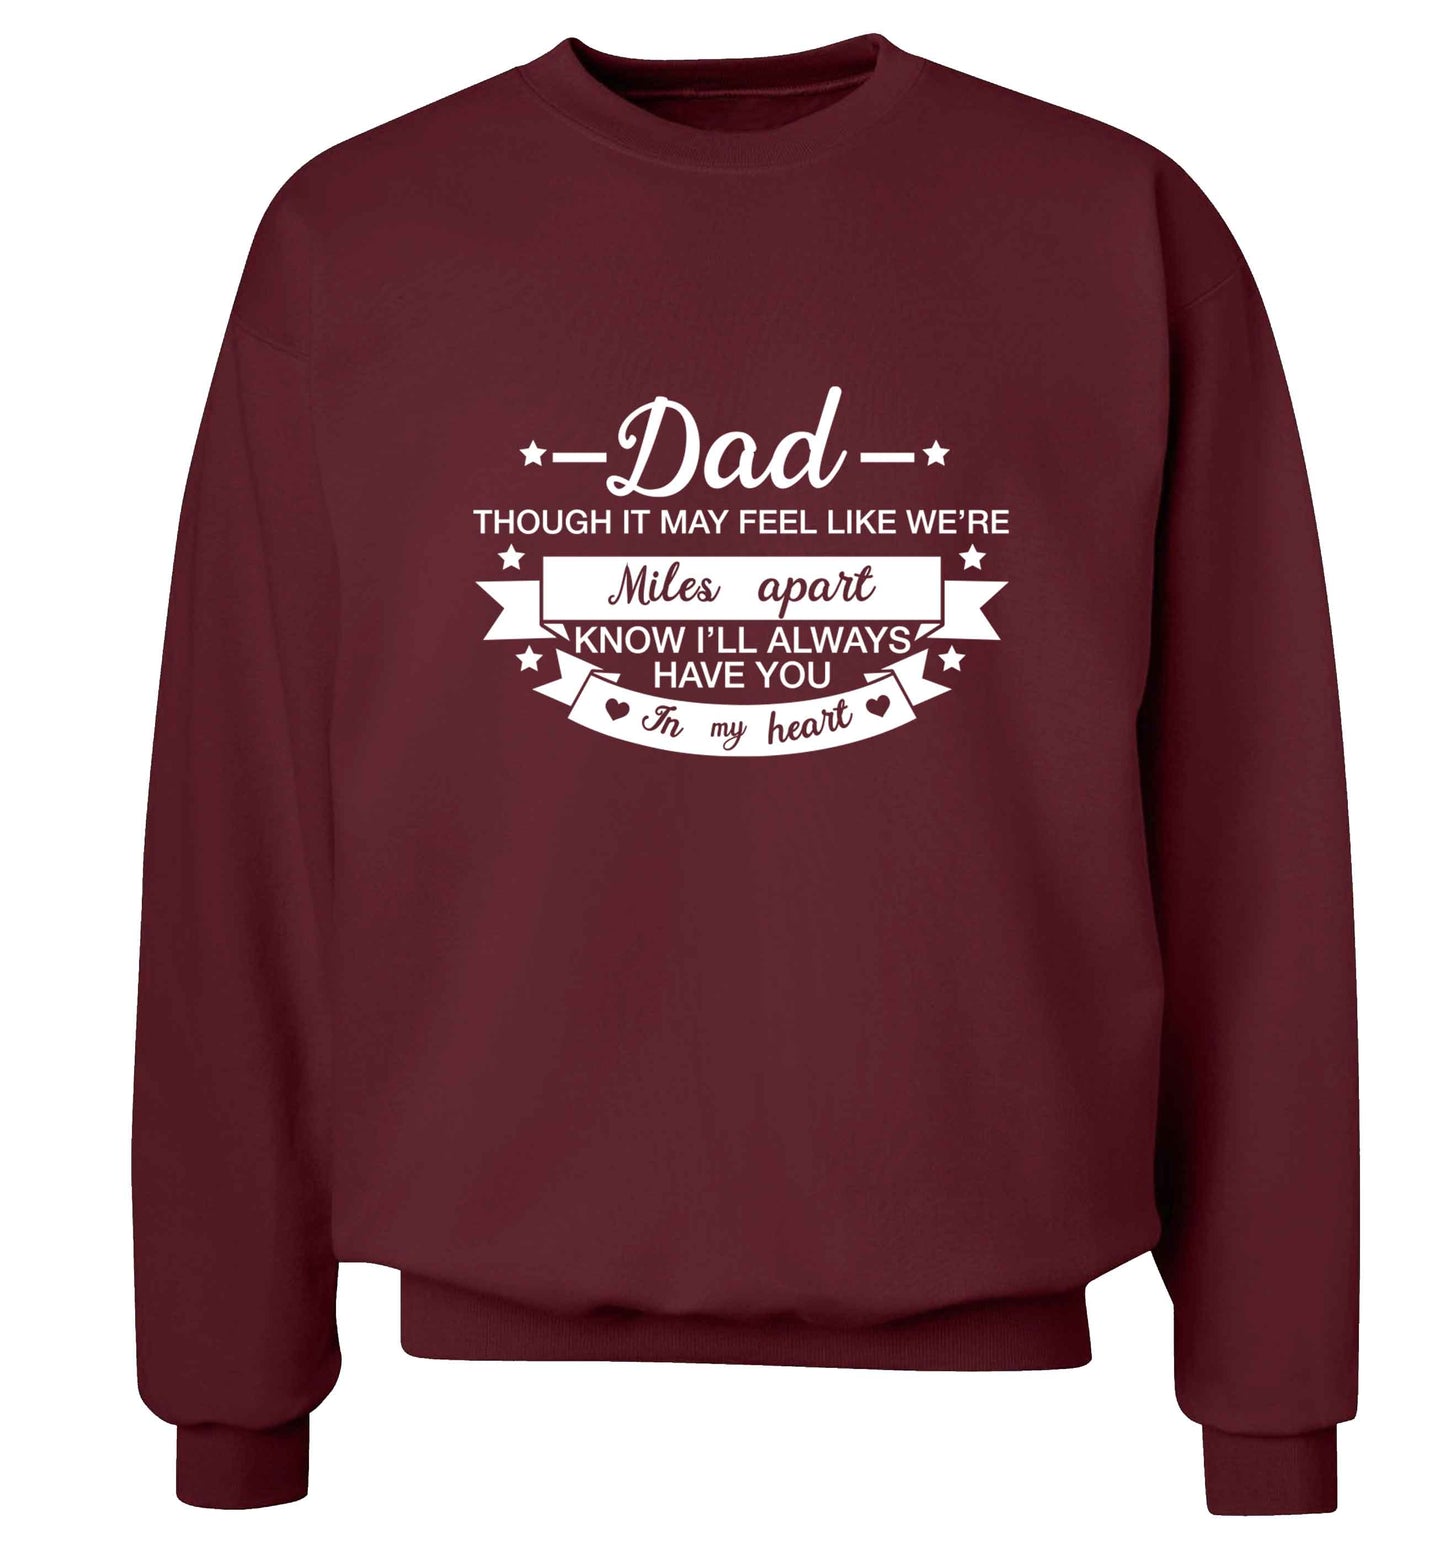 Dad though it may feel like we're miles apart know I'll always have you in my heart adult's unisex maroon sweater 2XL